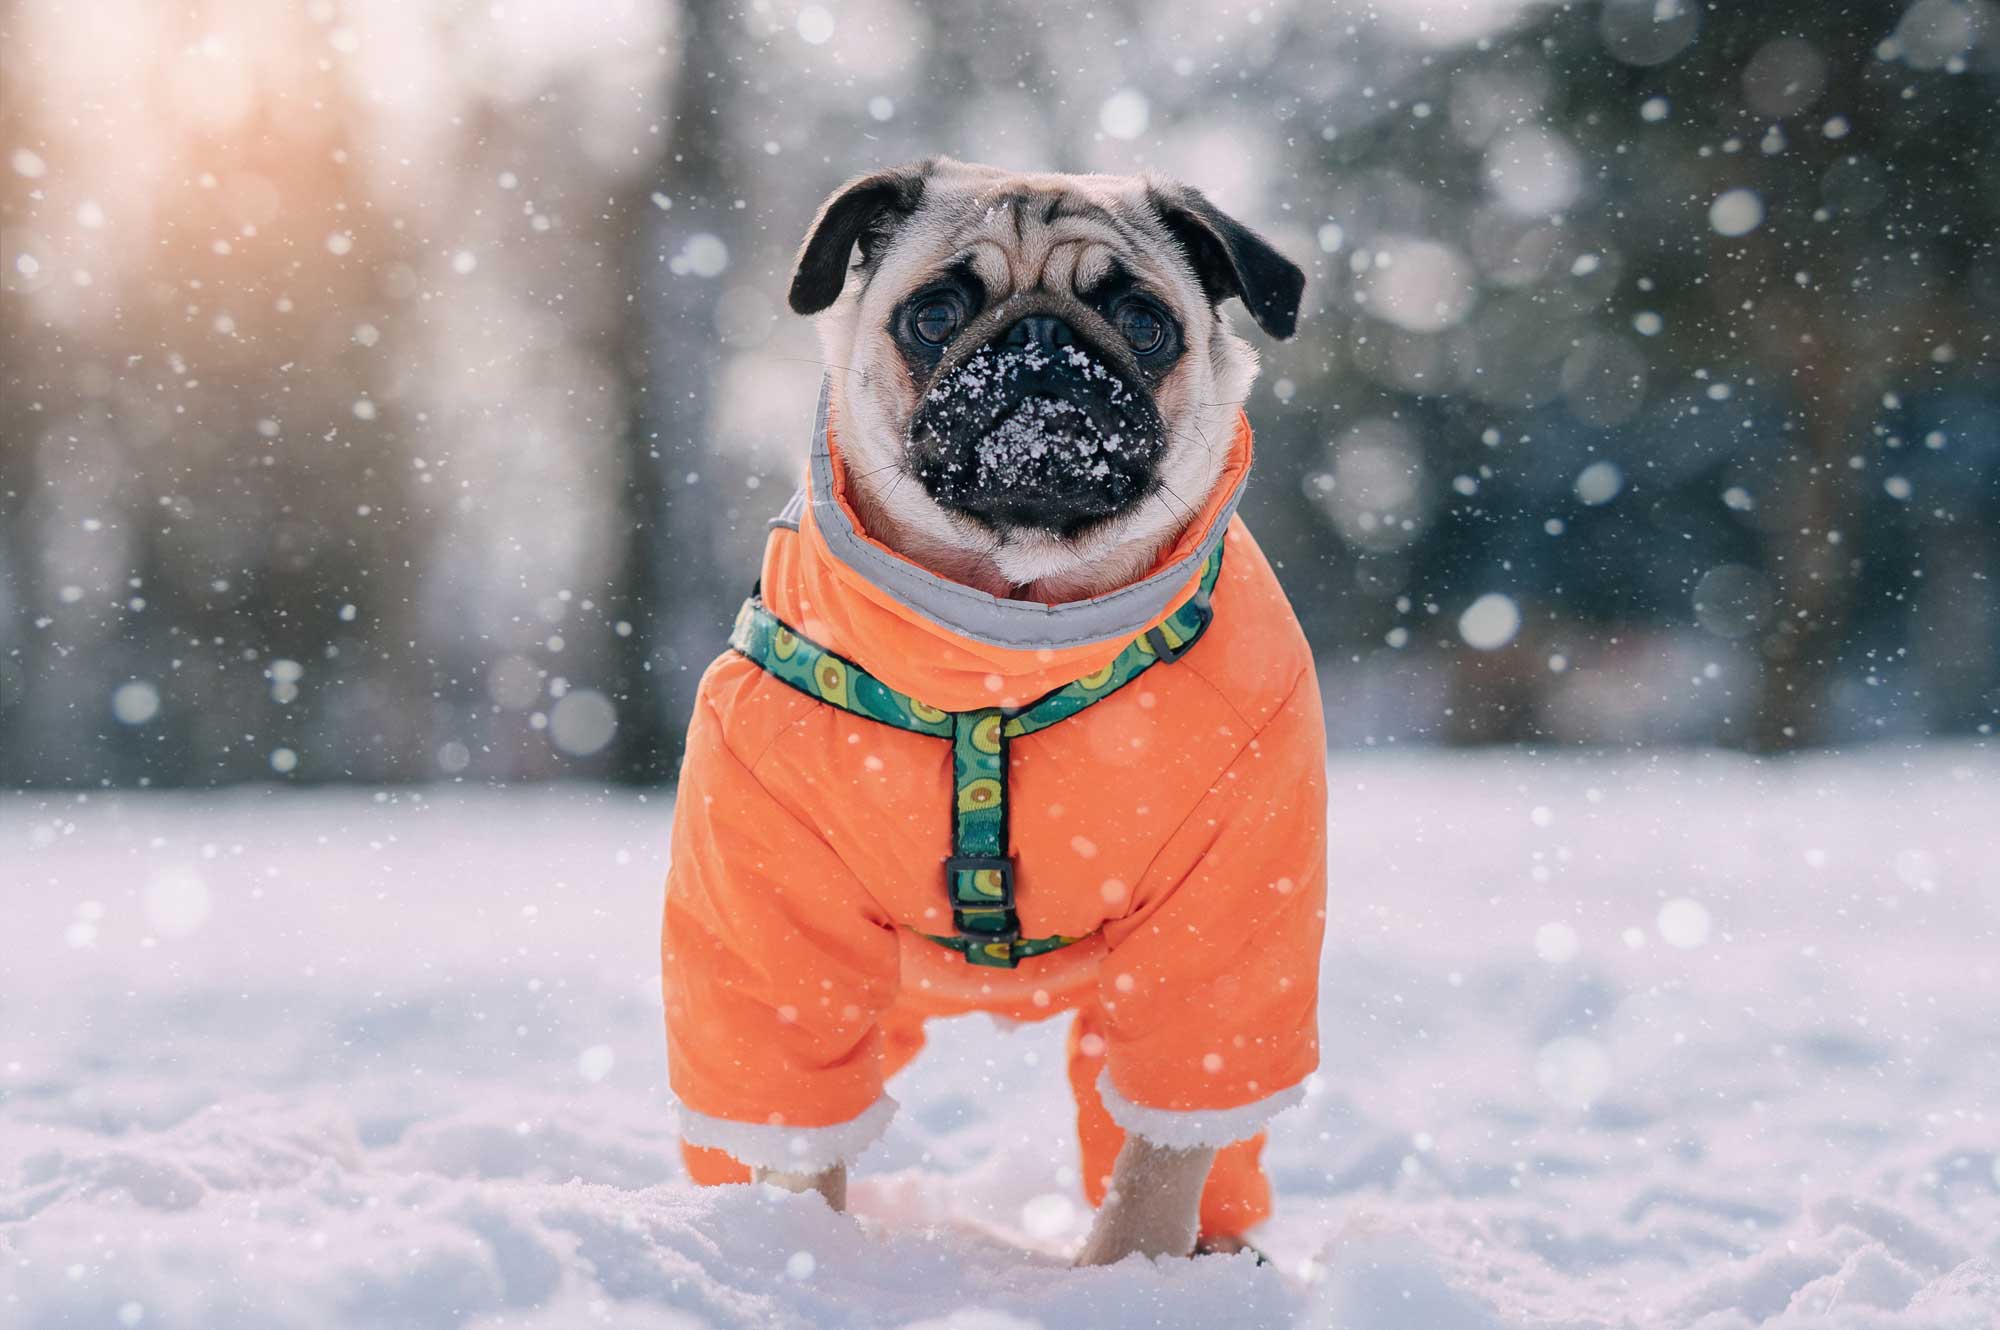 A pug stands in snow while wearing an orange jacket.